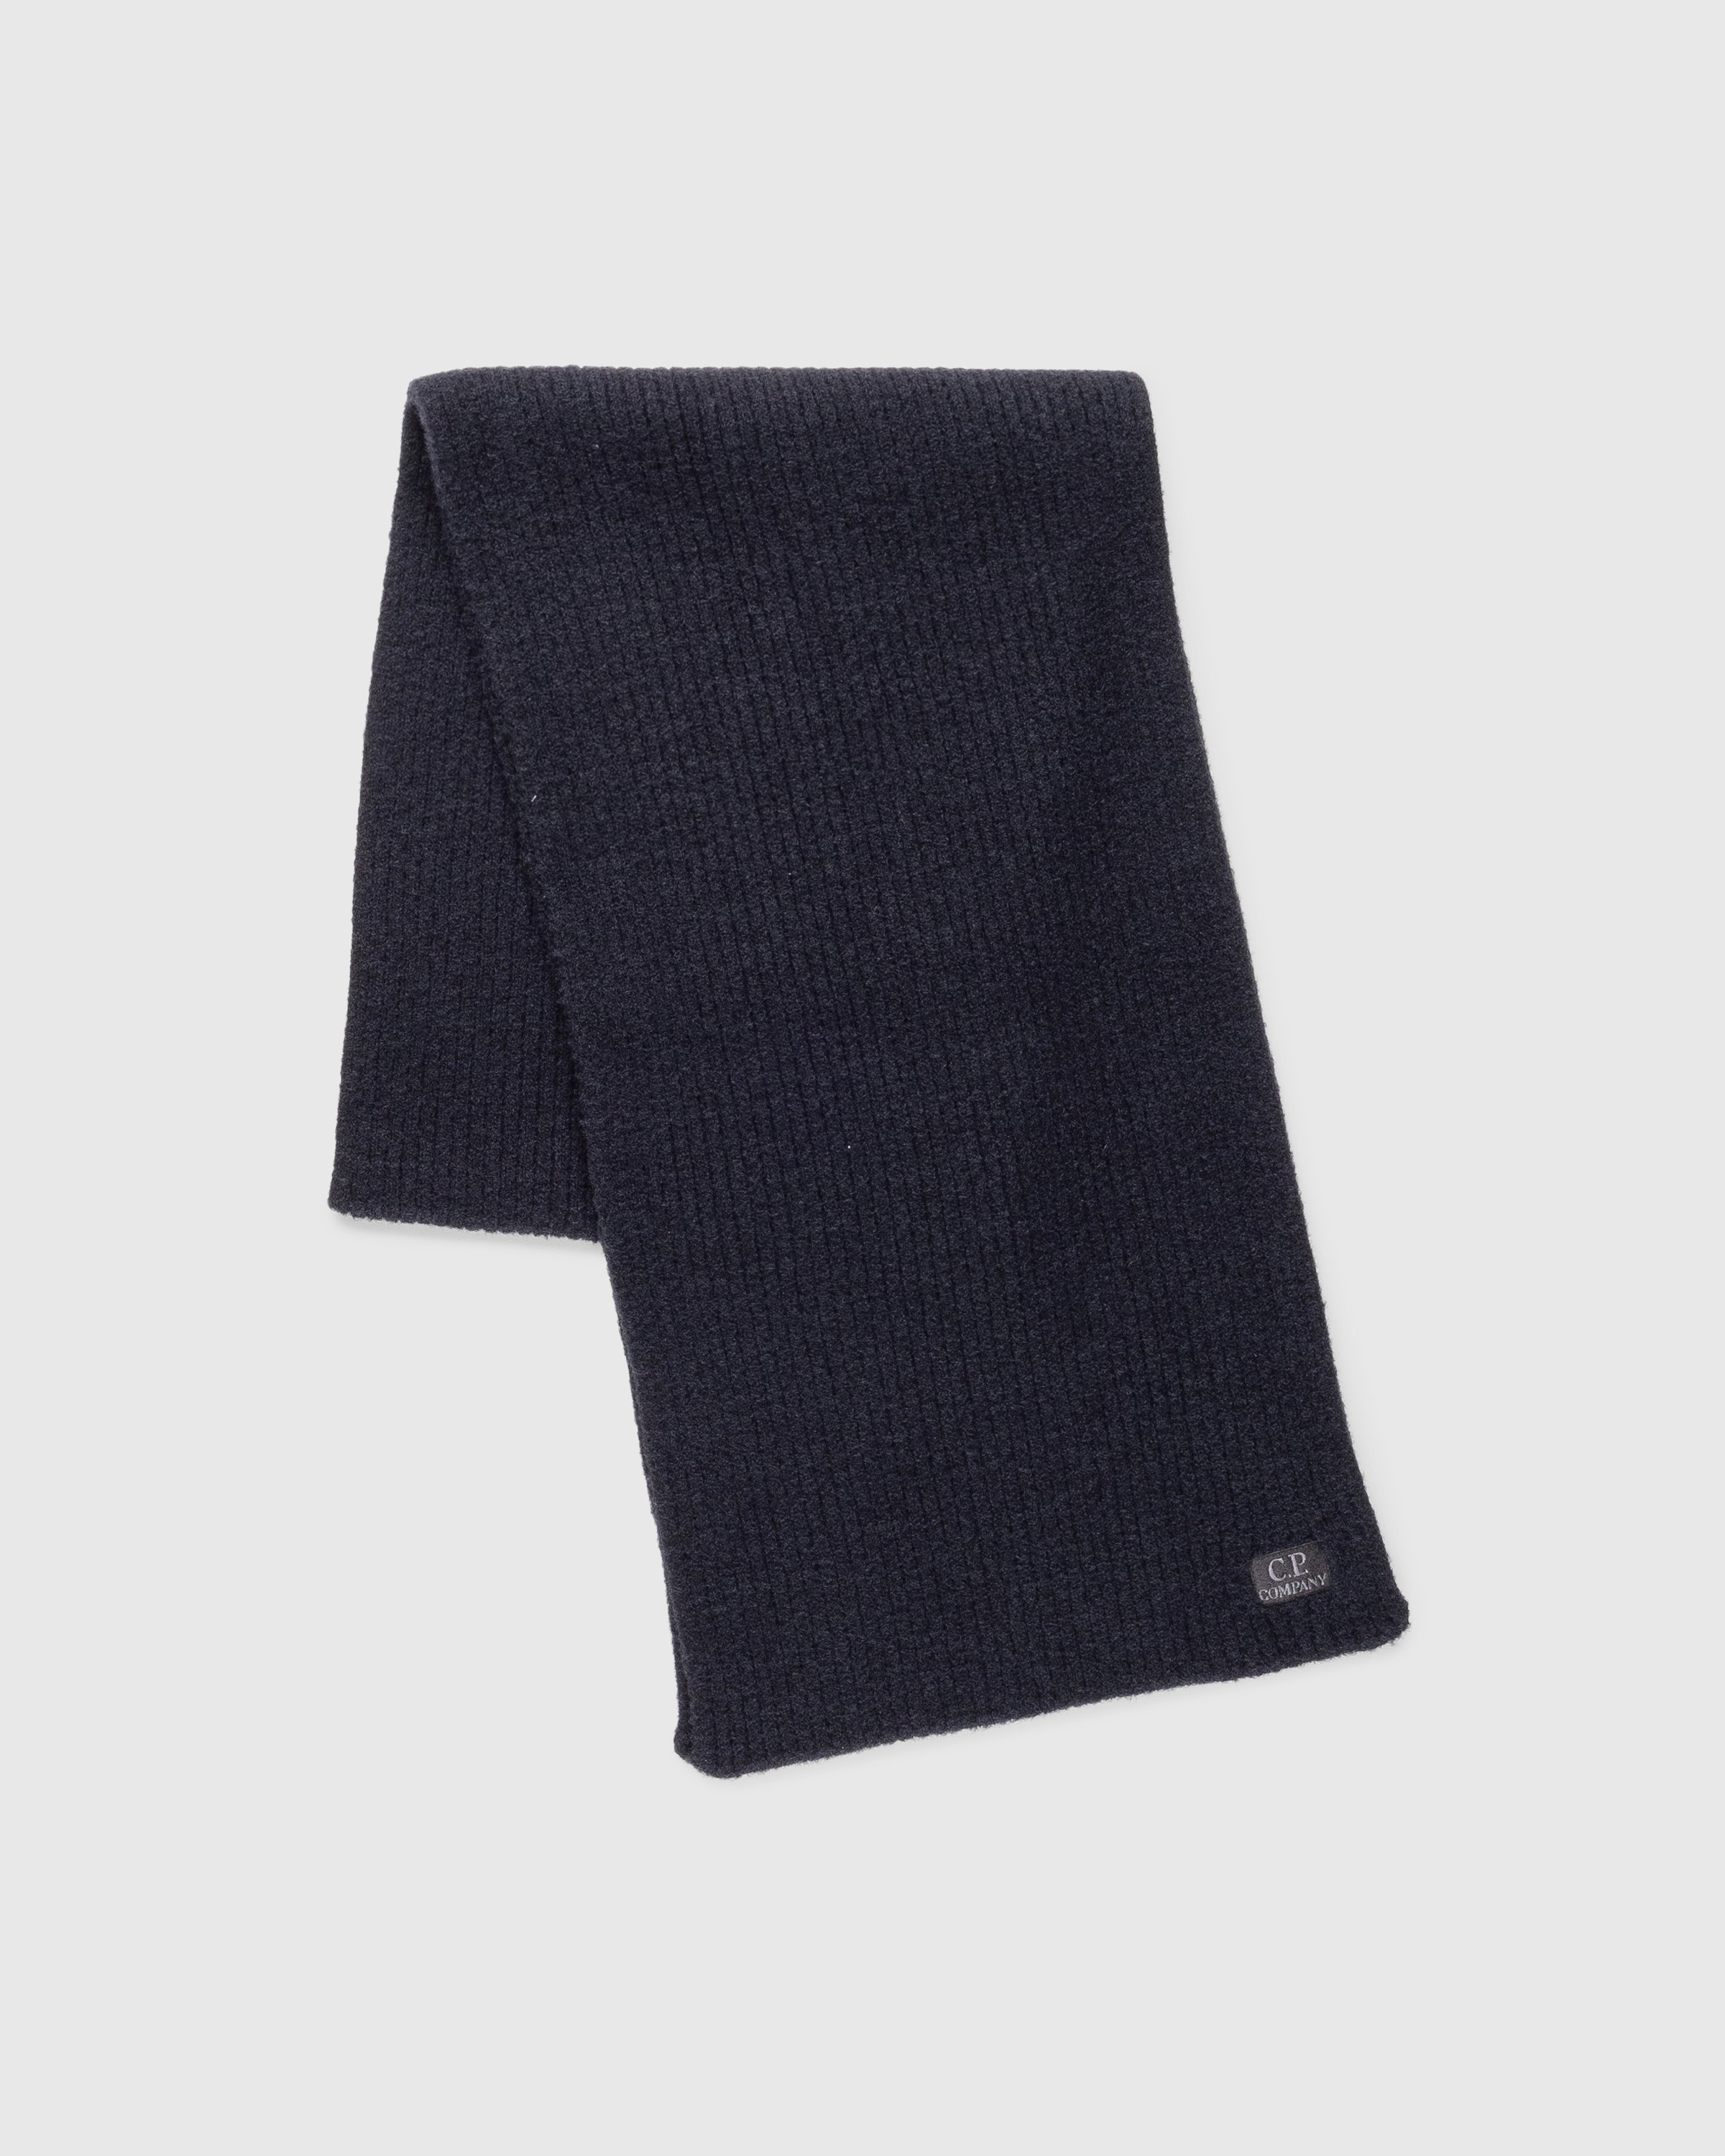 C.P. Company - Ribbed Logo Patch Scarf Black - Accessories - Black - Image 2